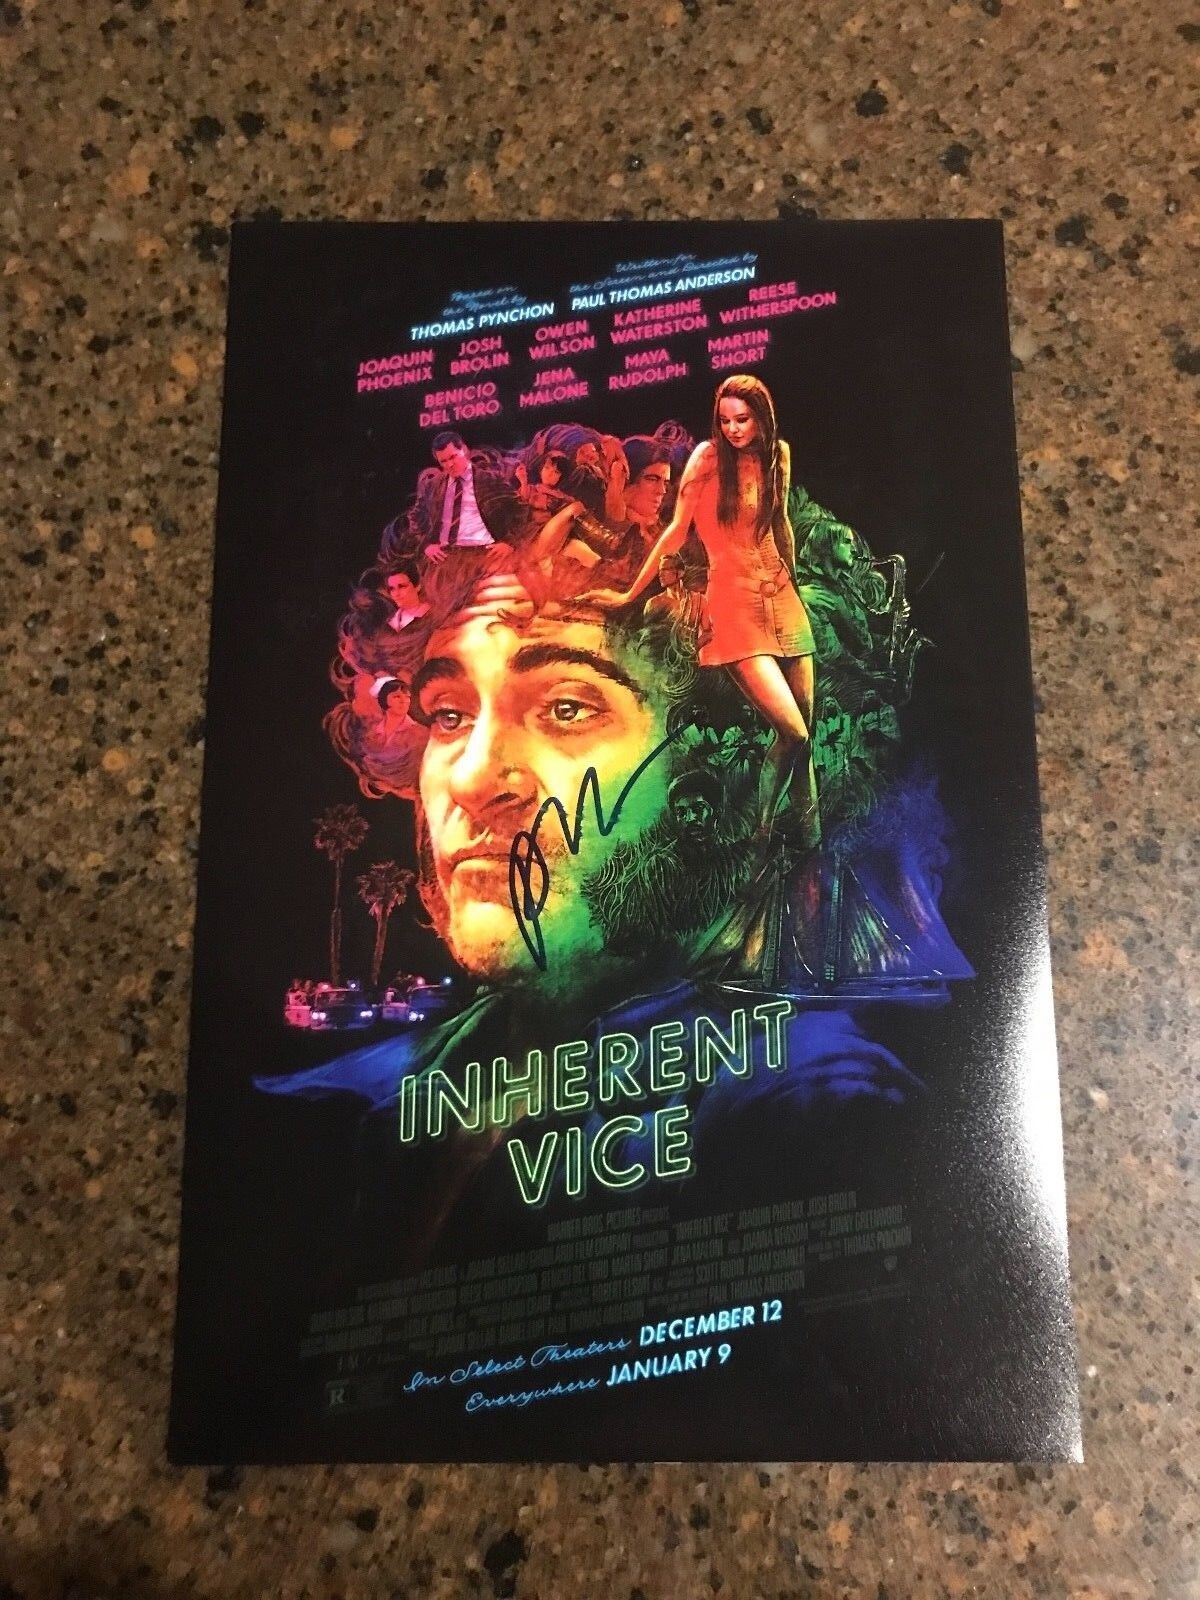 * PAUL THOMAS ANDERSON * Signed 12x18 Photo Poster painting poster * INHERENT VICE * 1